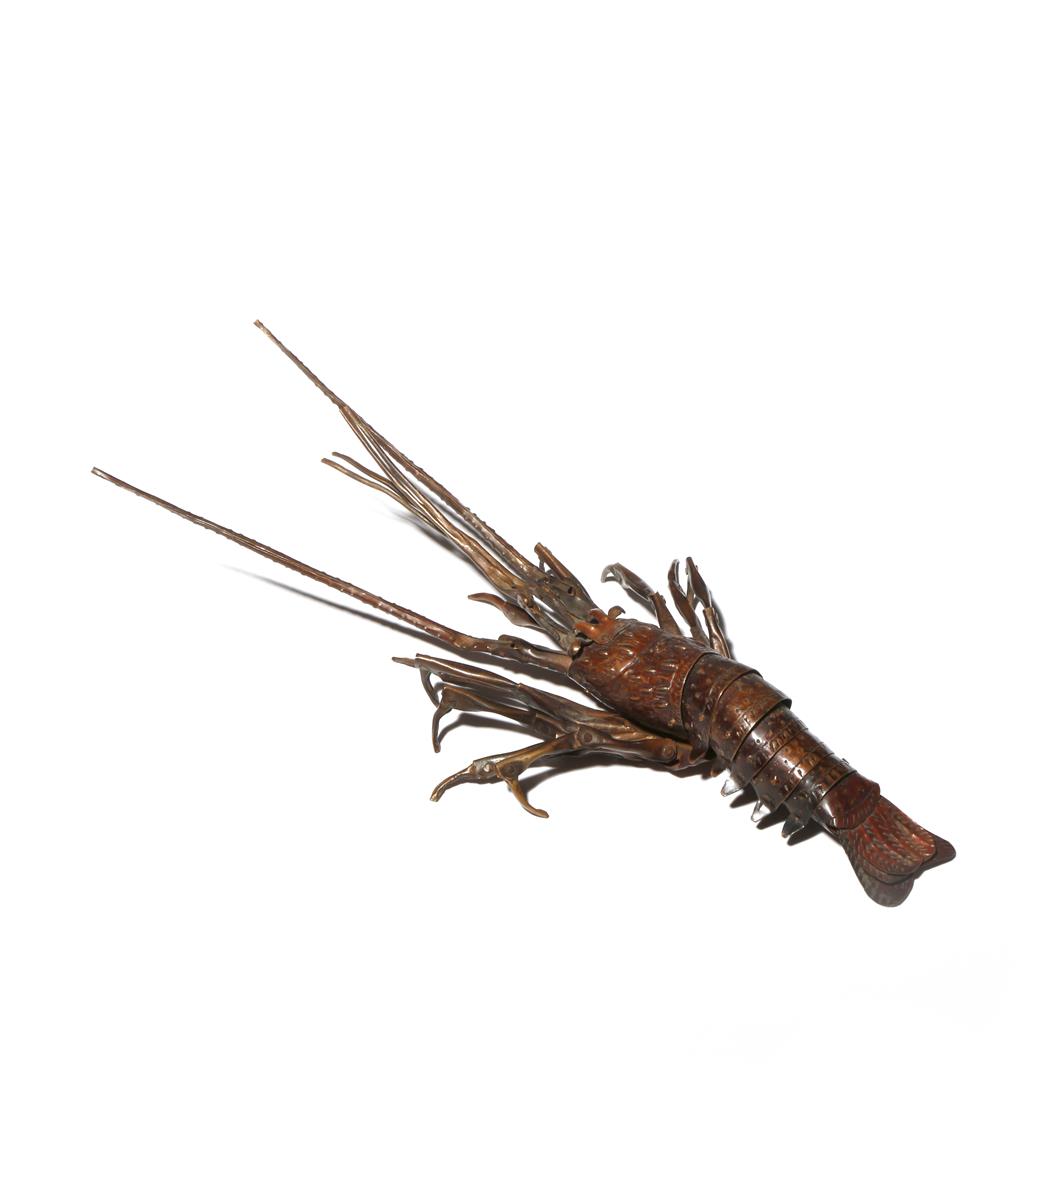 A JAPANESE ARTICULATED MODEL OF A CRAYFISH, JIZAI OKIMONO MEIJI PERIOD OR LATER, 19TH OR 20TH